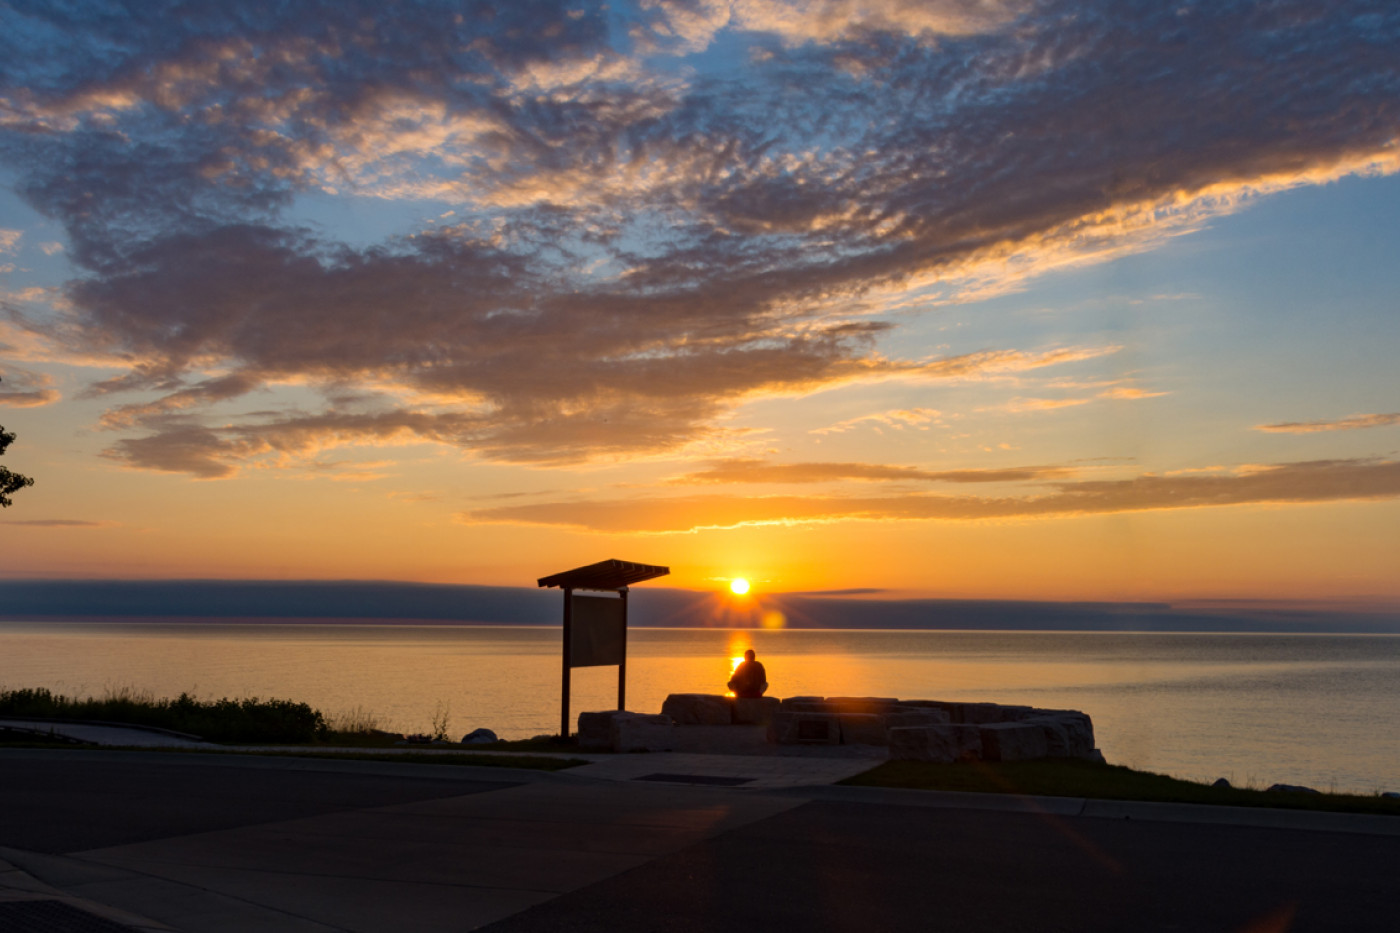 Carthage's outdoor classroom provides the perfect place to watch the sunrise.